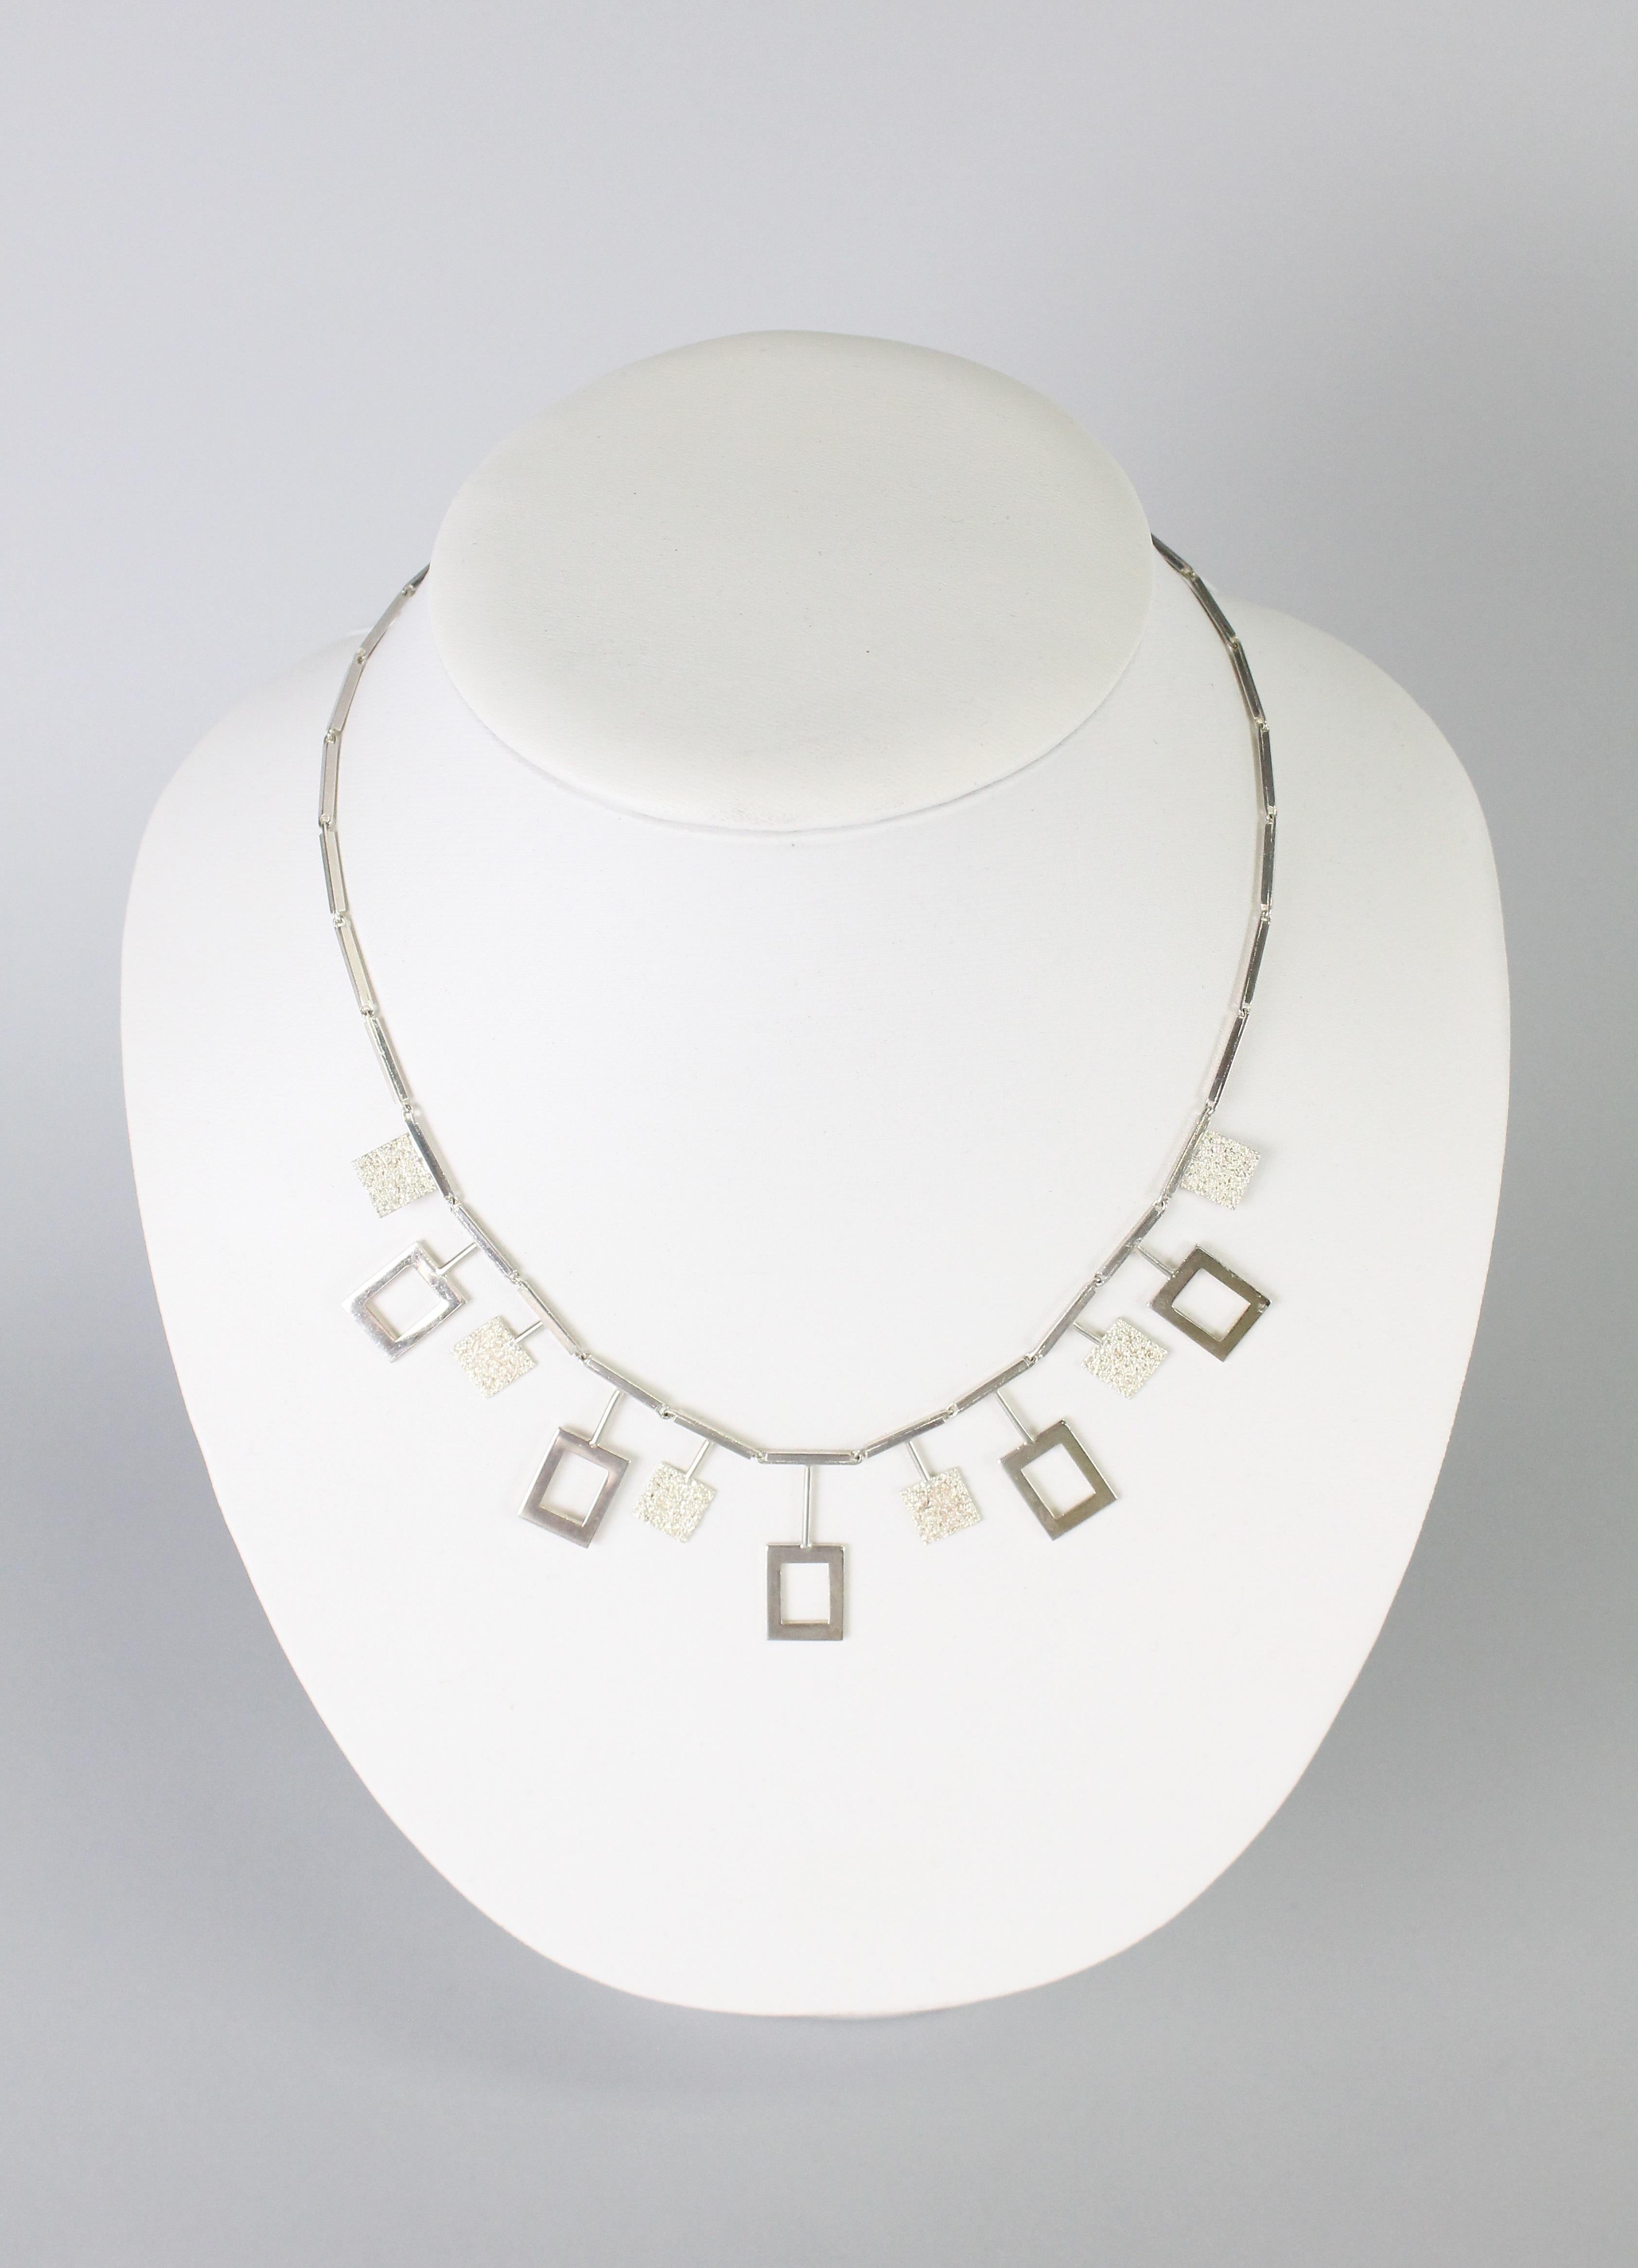 A wonderful modernist Swedish necklace by Karl Erik Palmberg, 1945.
Great original condition, no issues.